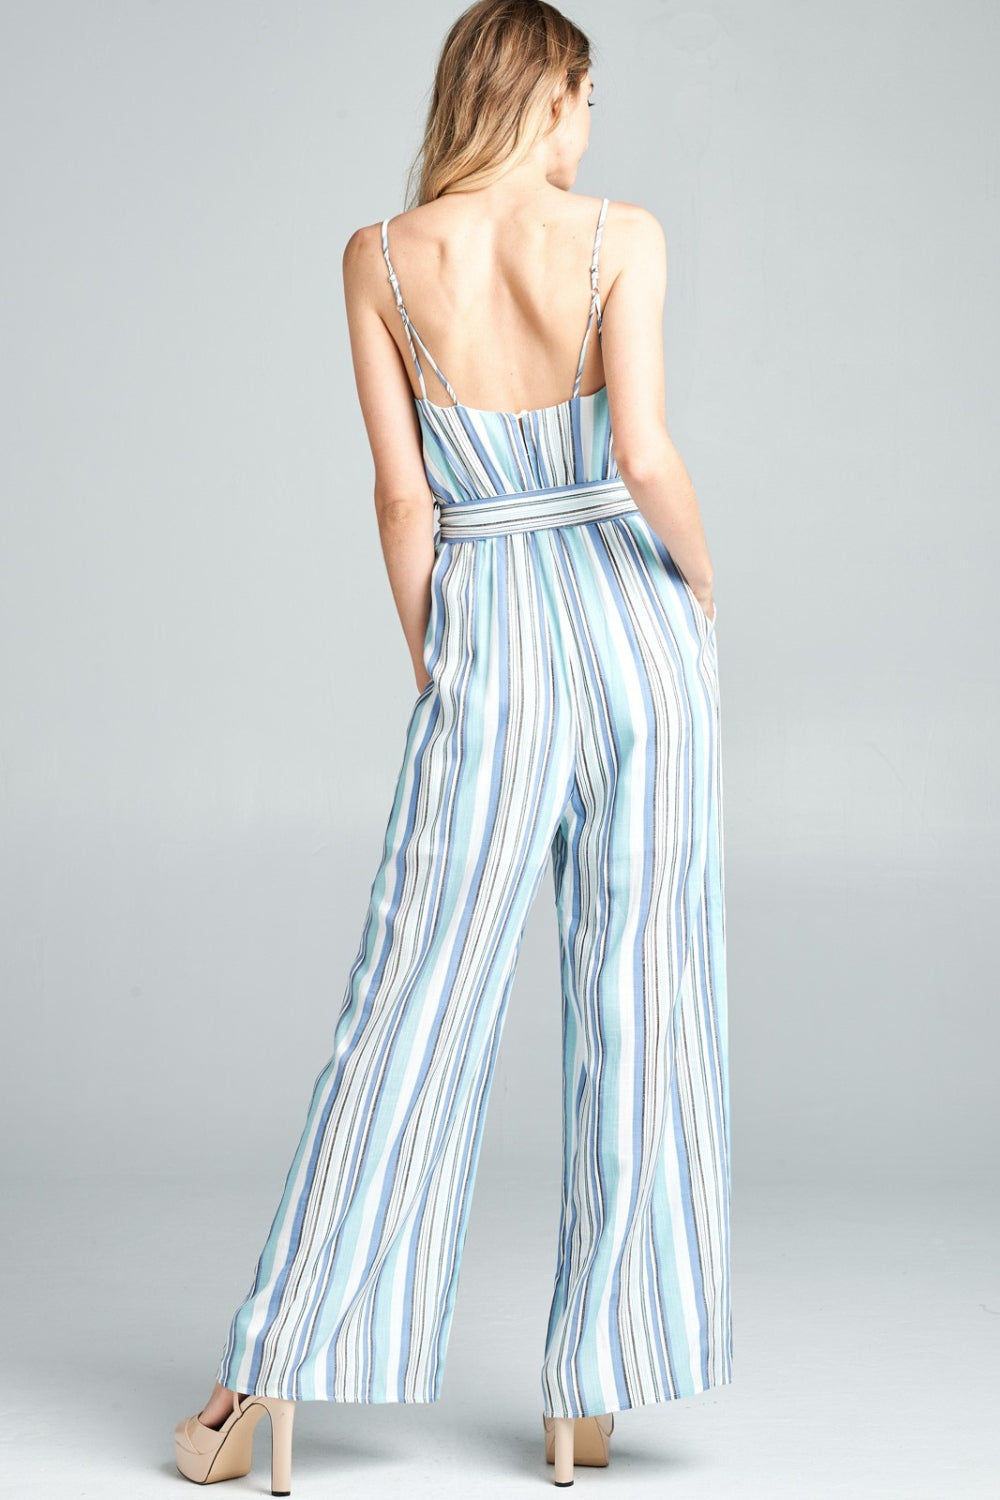 Cotton Bleu by Nu Label Tie Front Striped Sleeveless Jumpsuit-Jumpsuits & Rompers-Inspired by Justeen-Women's Clothing Boutique